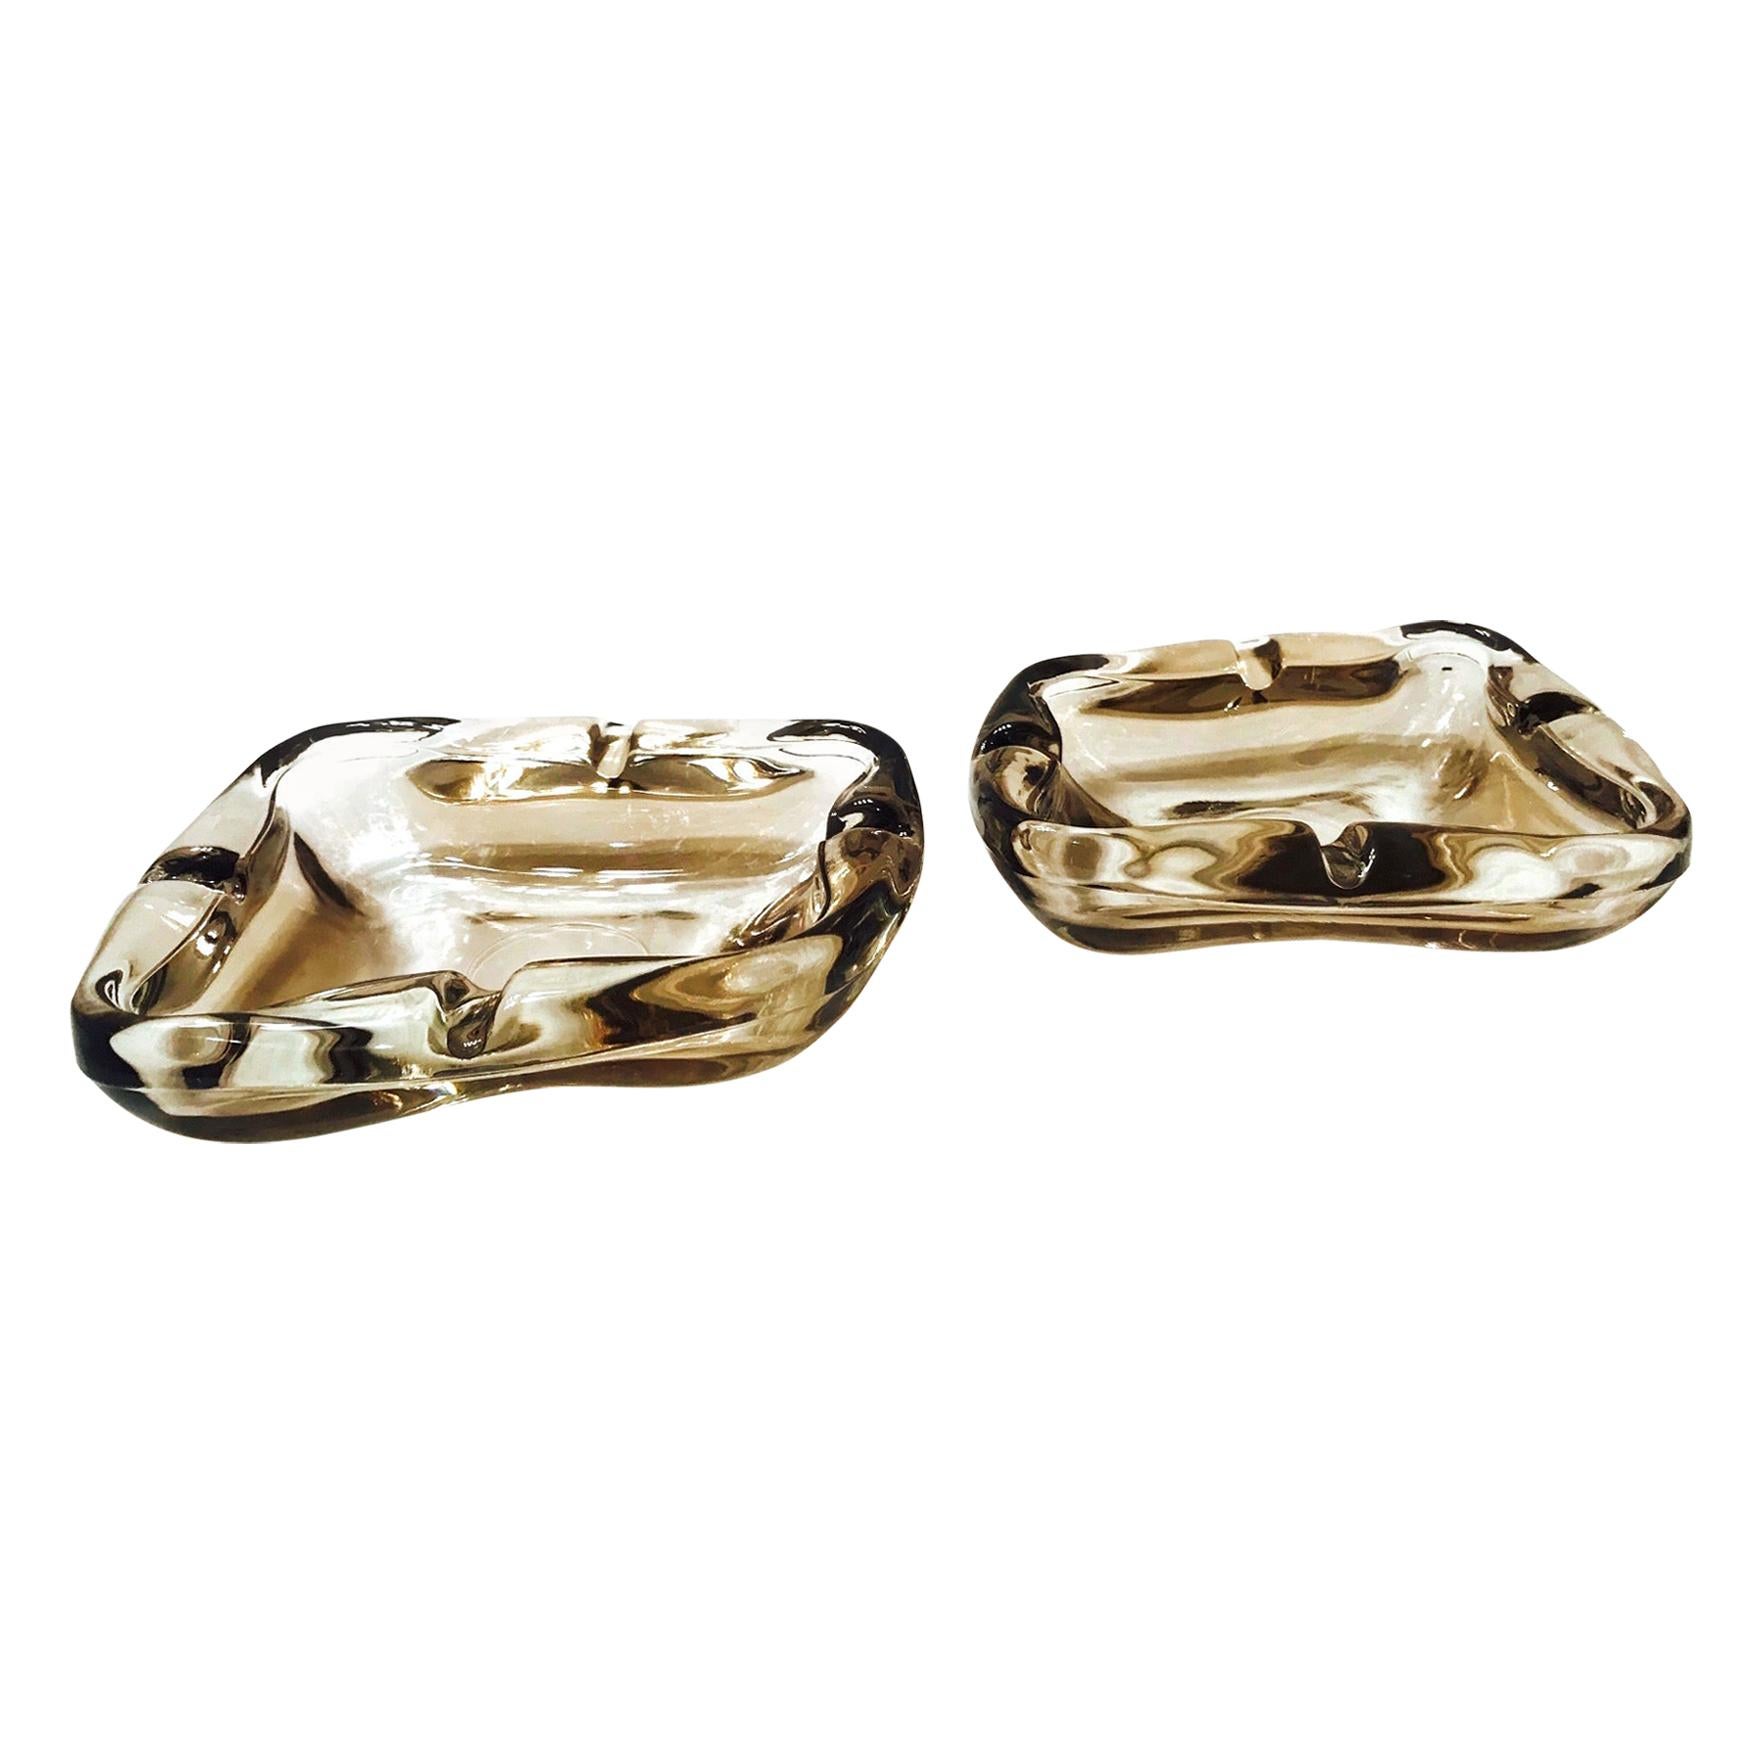 Pair of French Mid-Century Modern Smoked Glass Ashtrays, 1960s